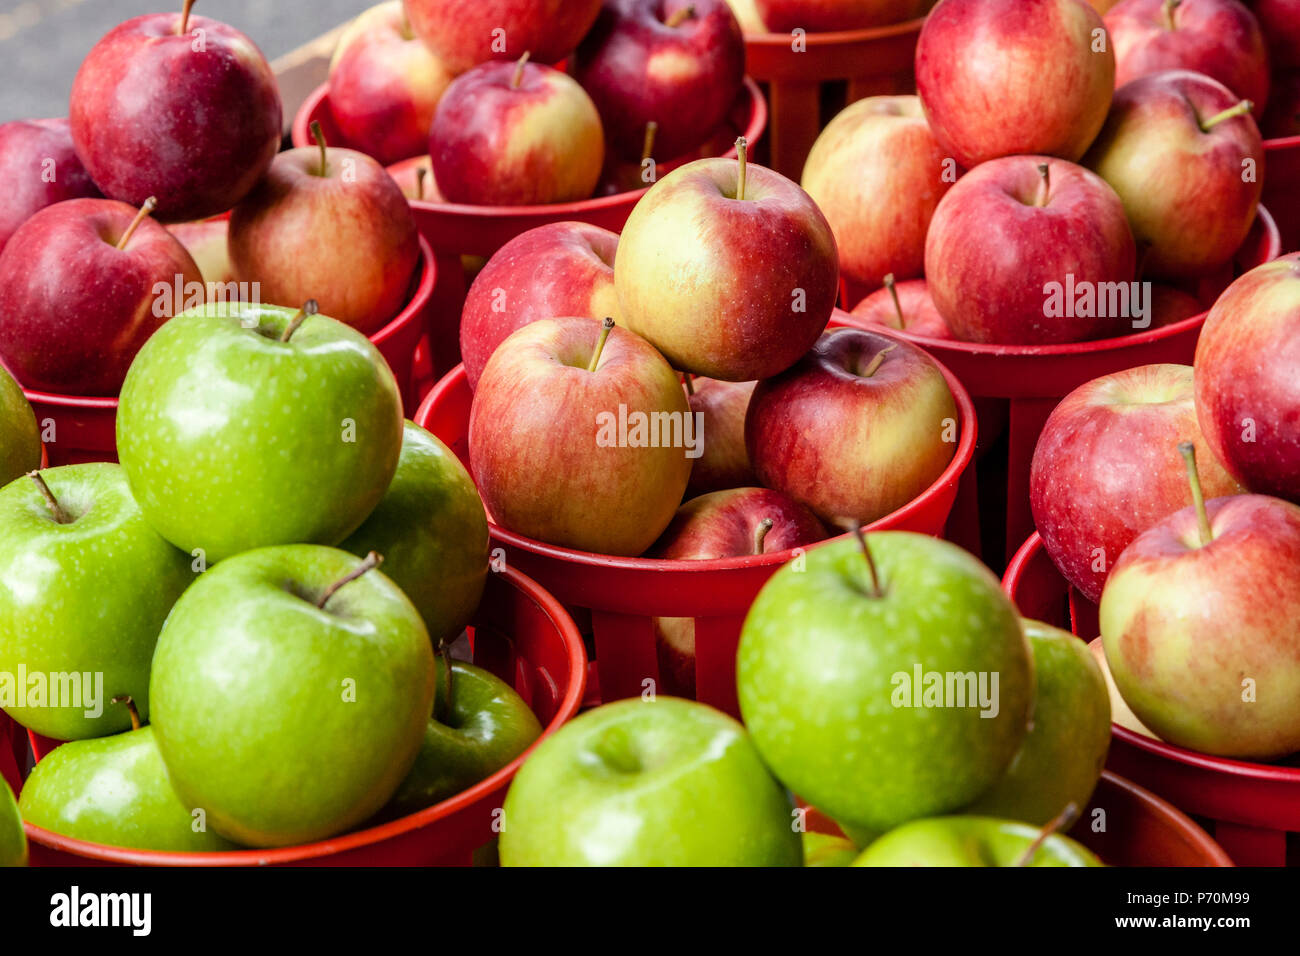 An abundance of red and green apples in baskets. Stock Photo